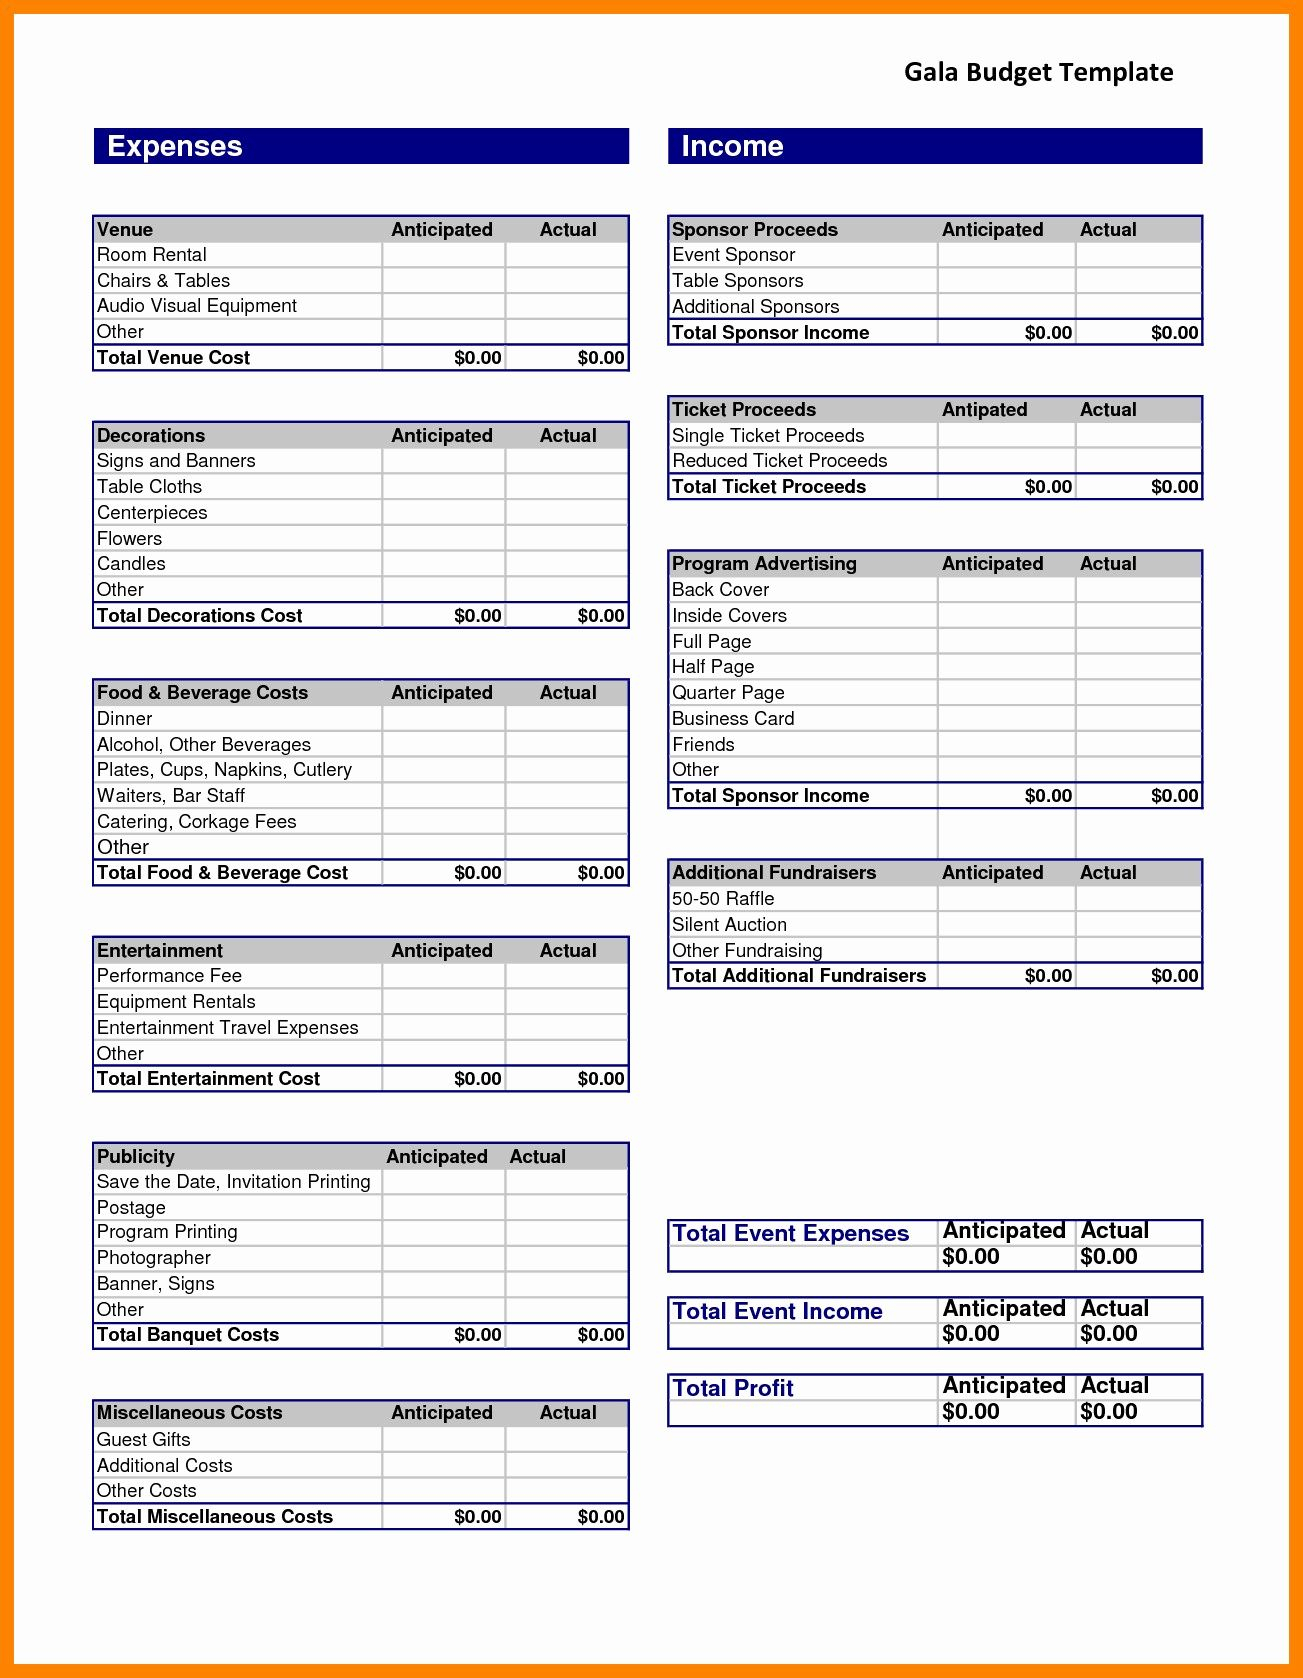 Candle Making Cost Spreadsheet Inside Travel Expenses Spreadsheet Template  Heritage Spreadsheet